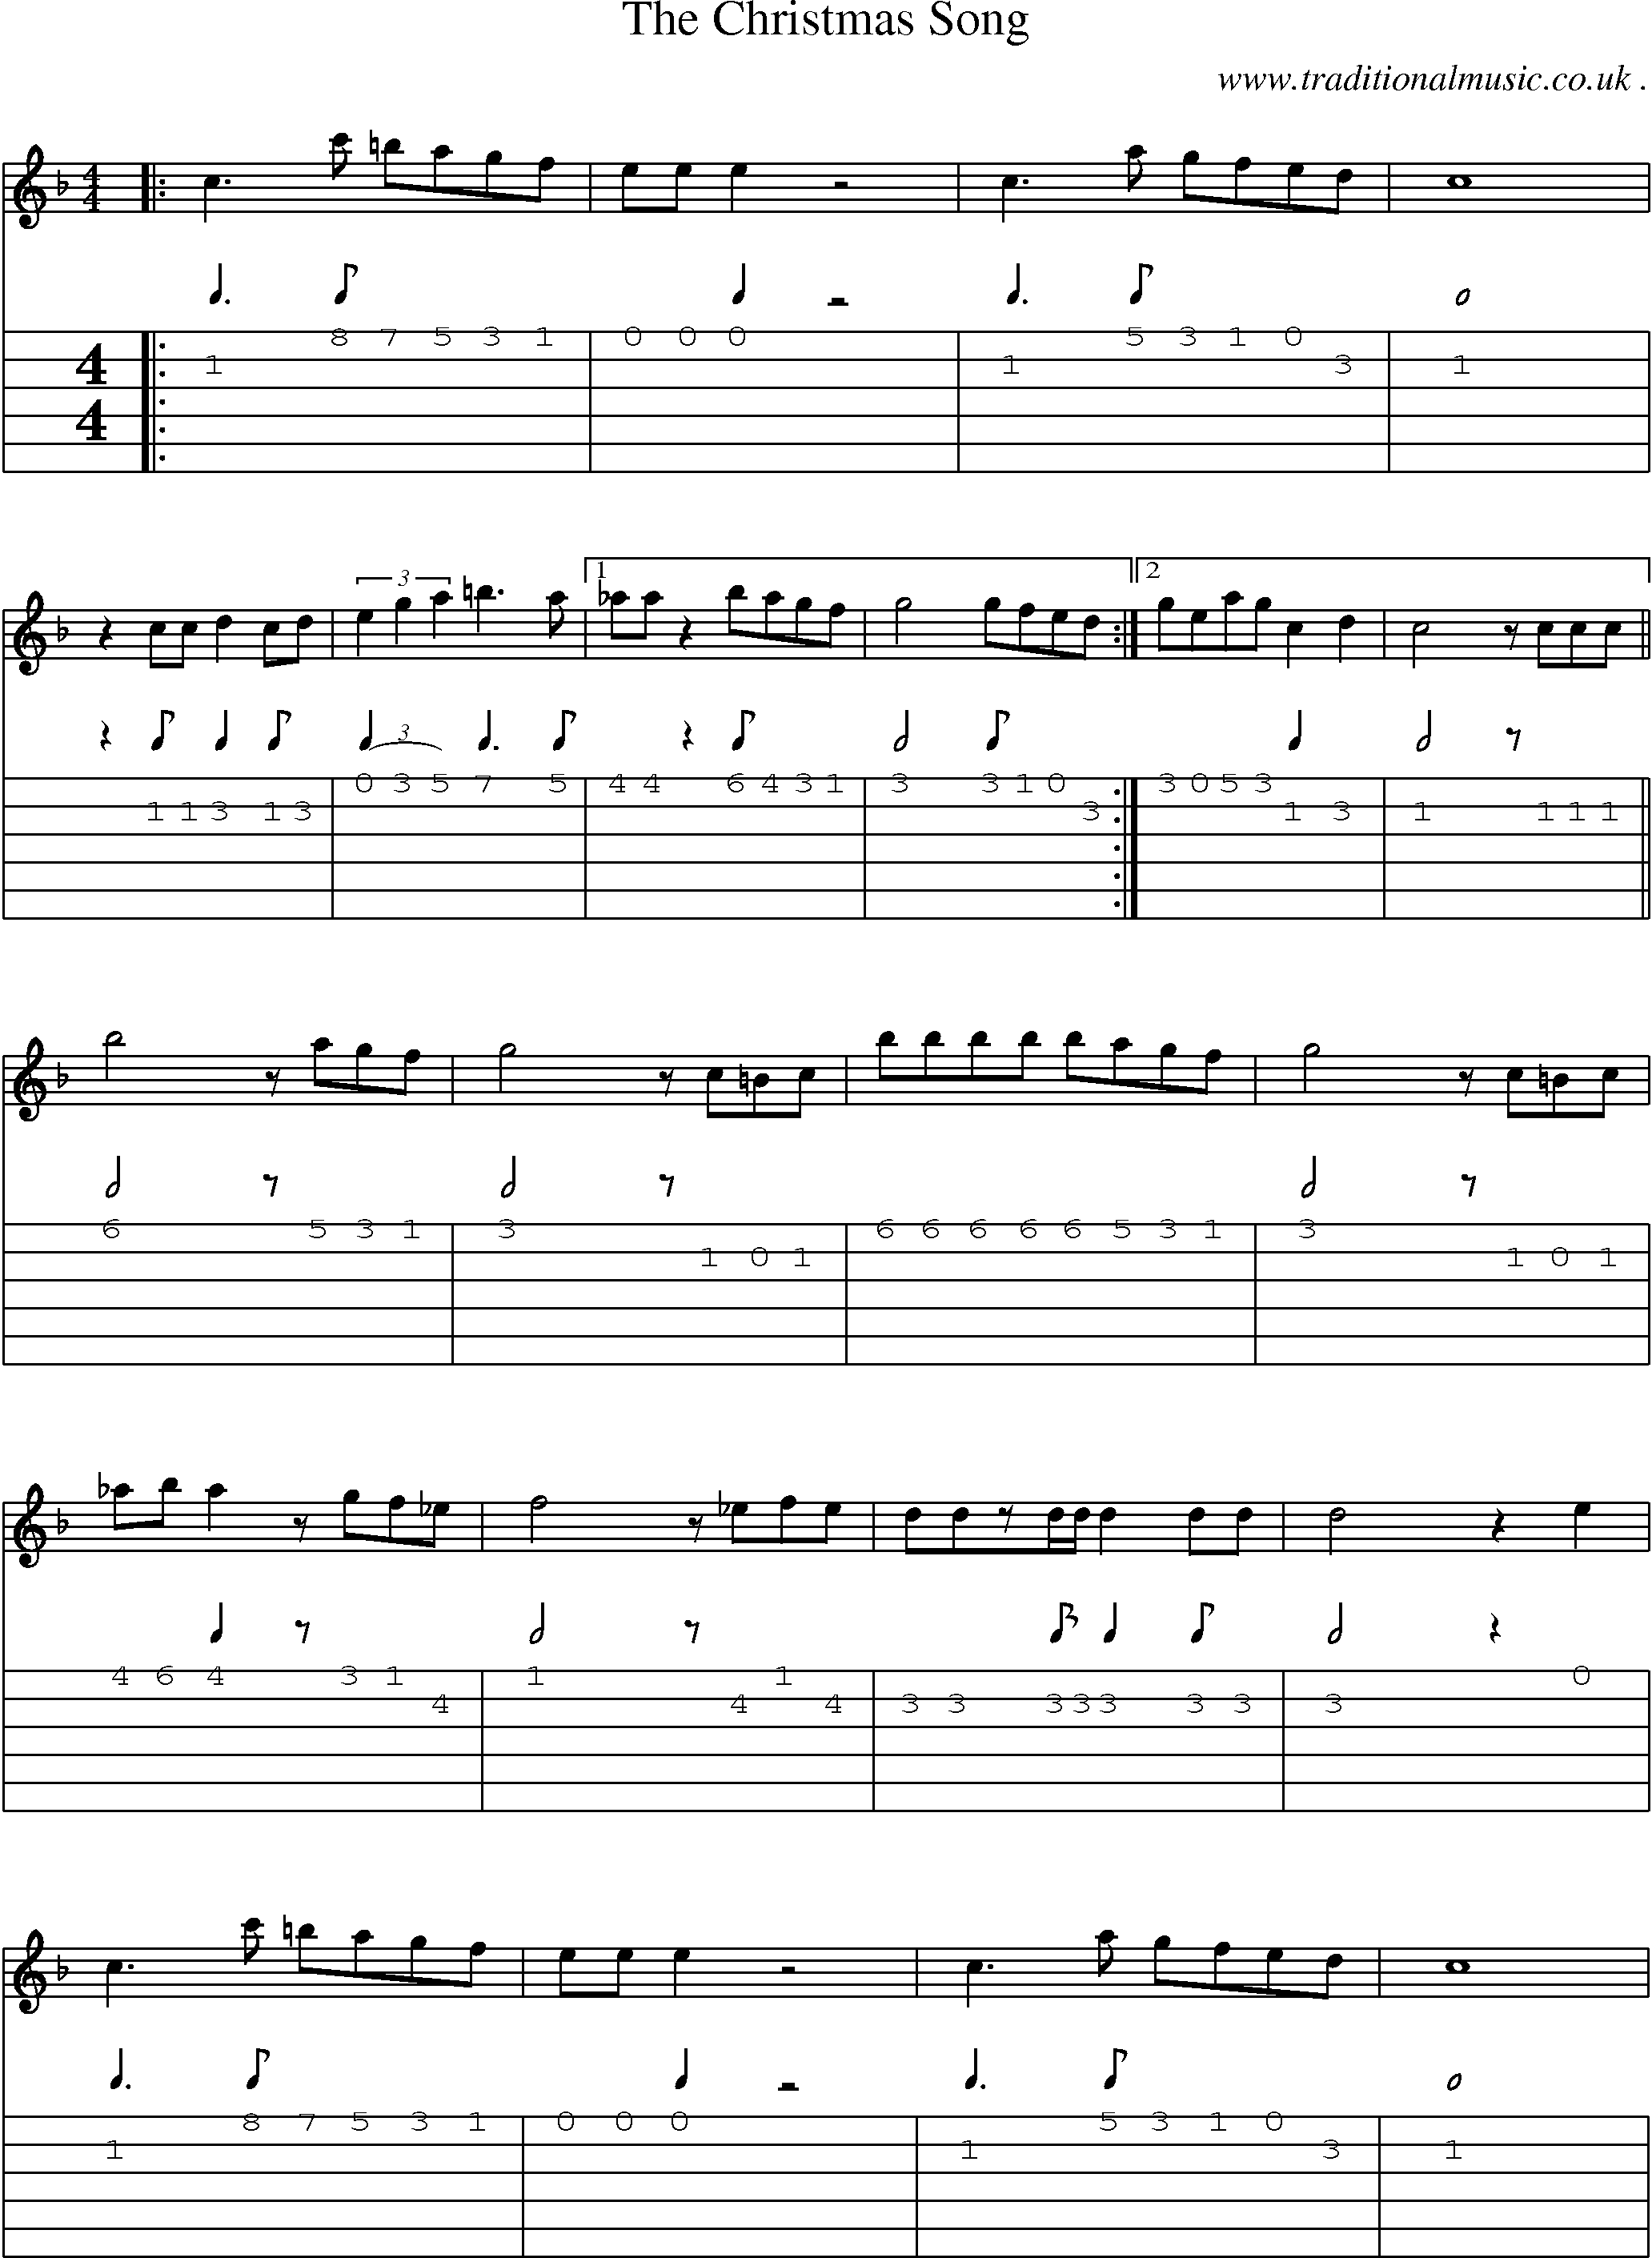 Music Score and Guitar Tabs for The Christmas Song